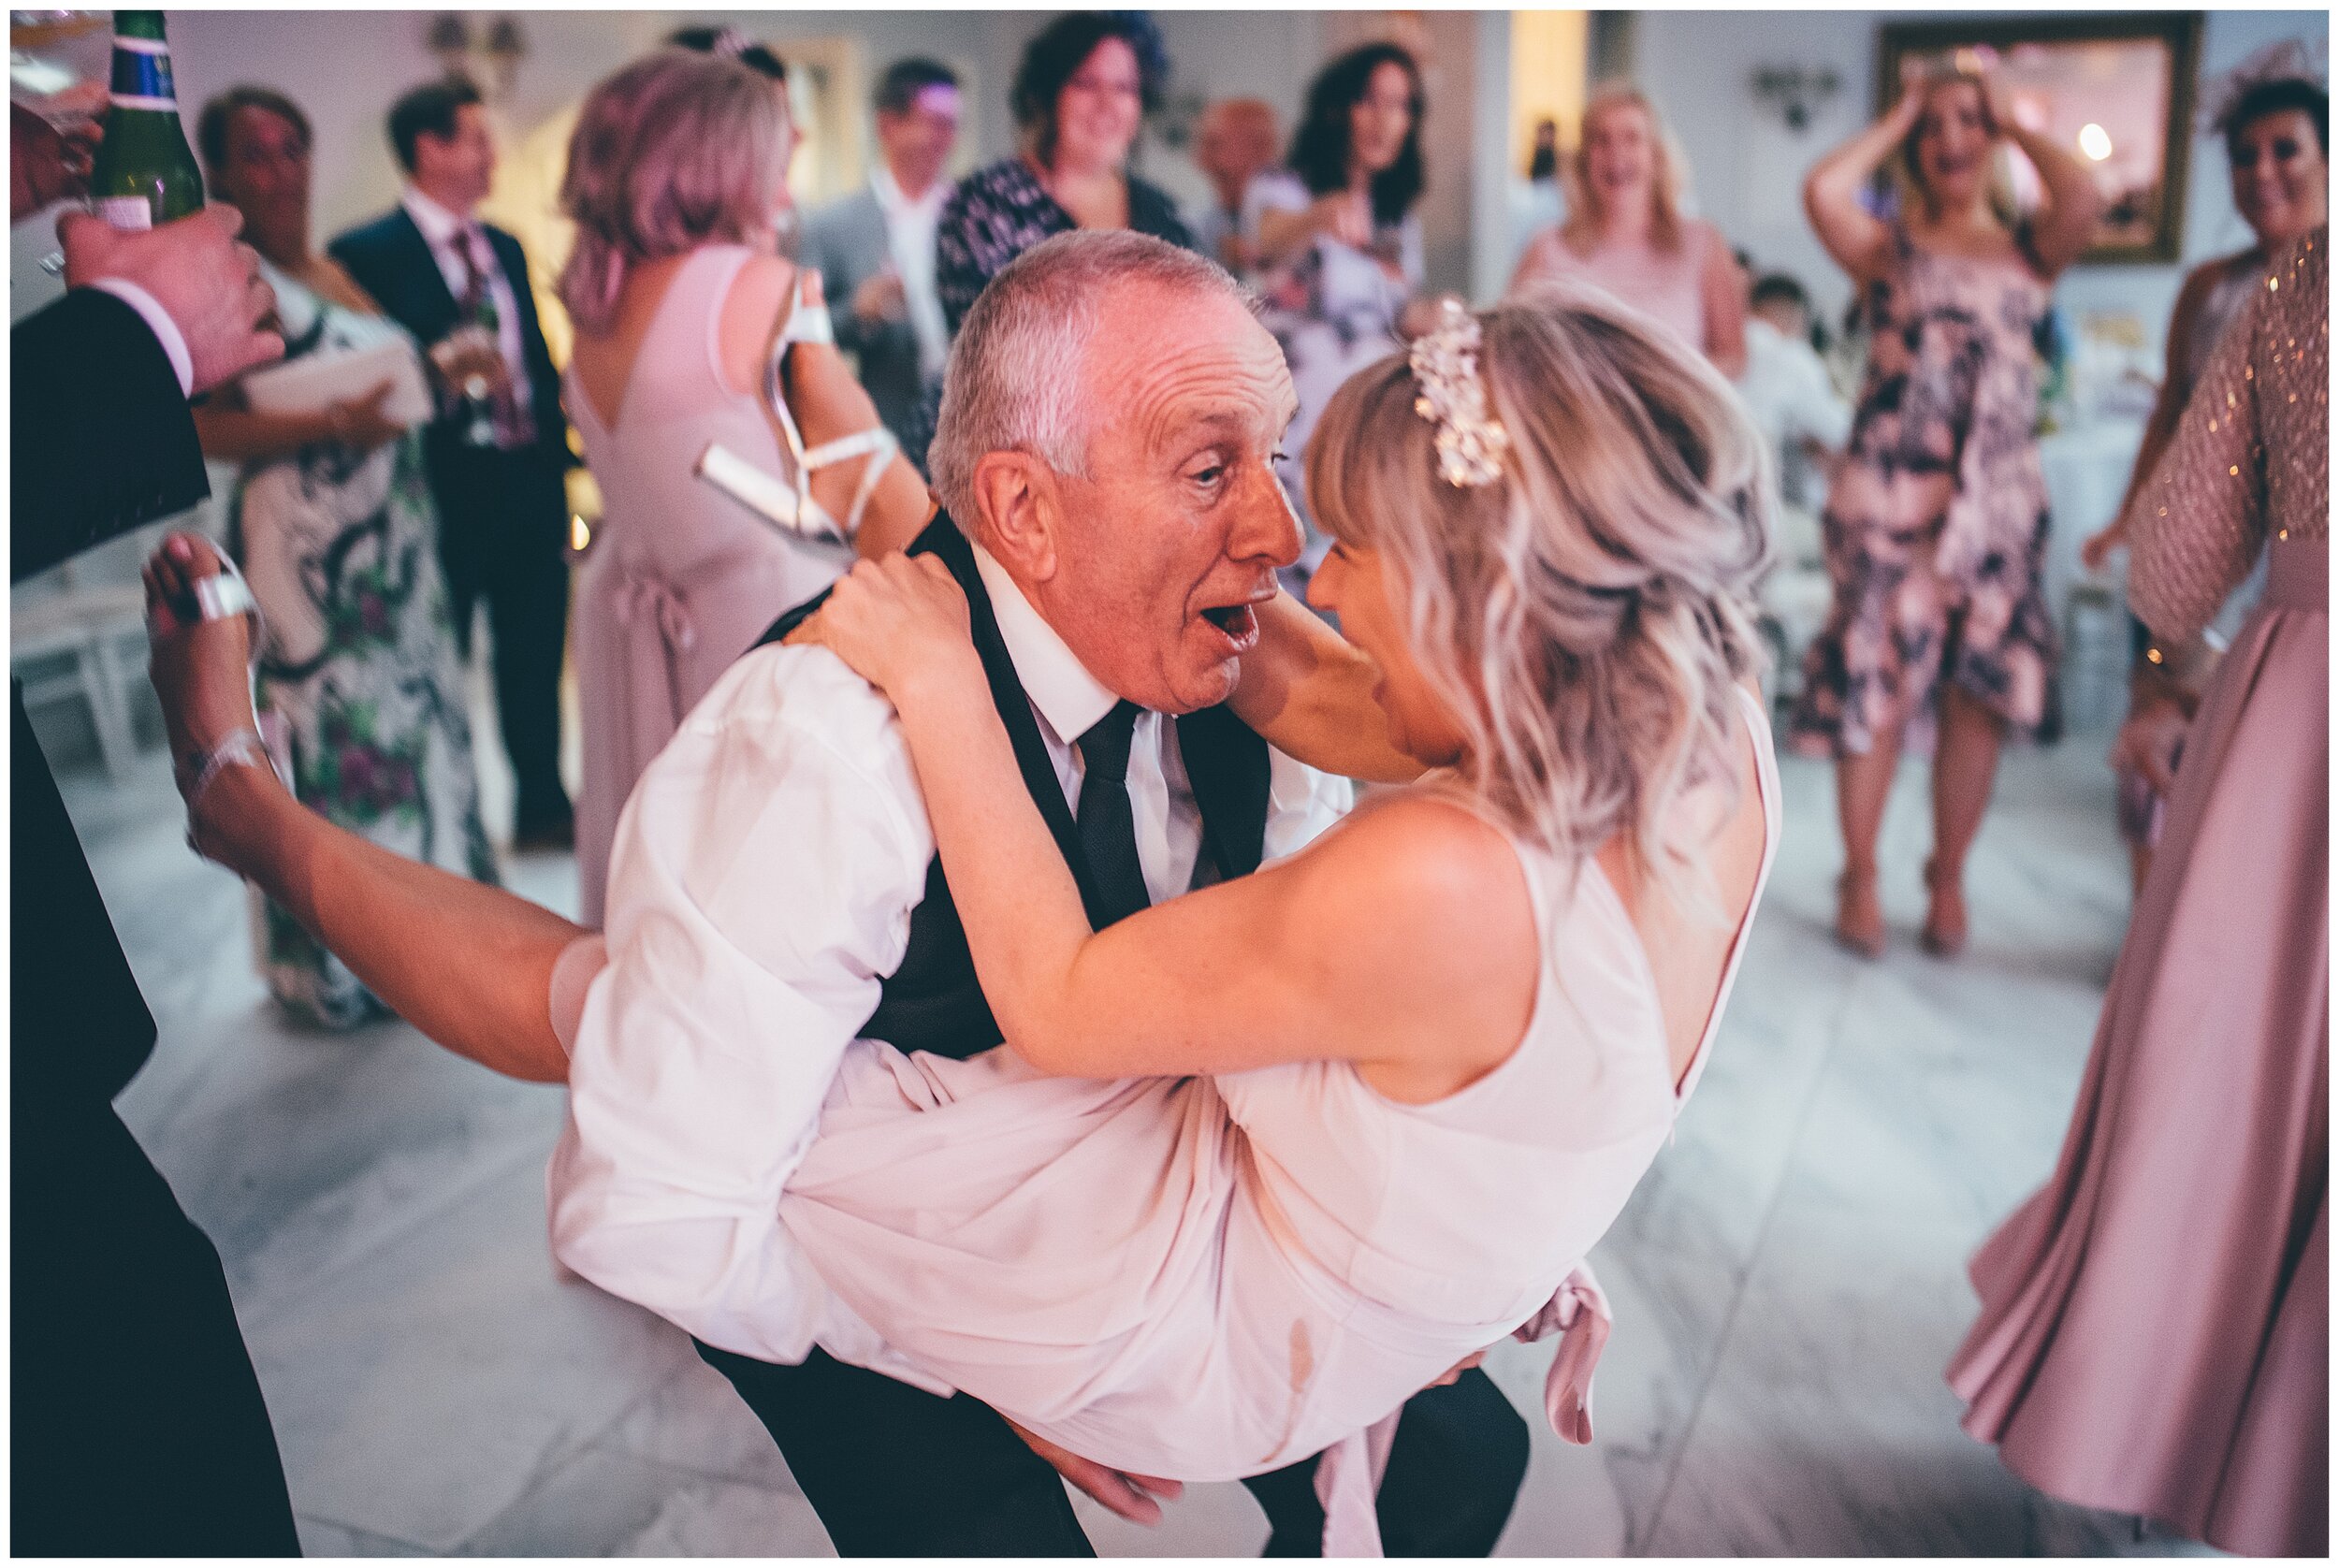 hilarious photograph of the brides dad lifting up one of the bridesmaids.